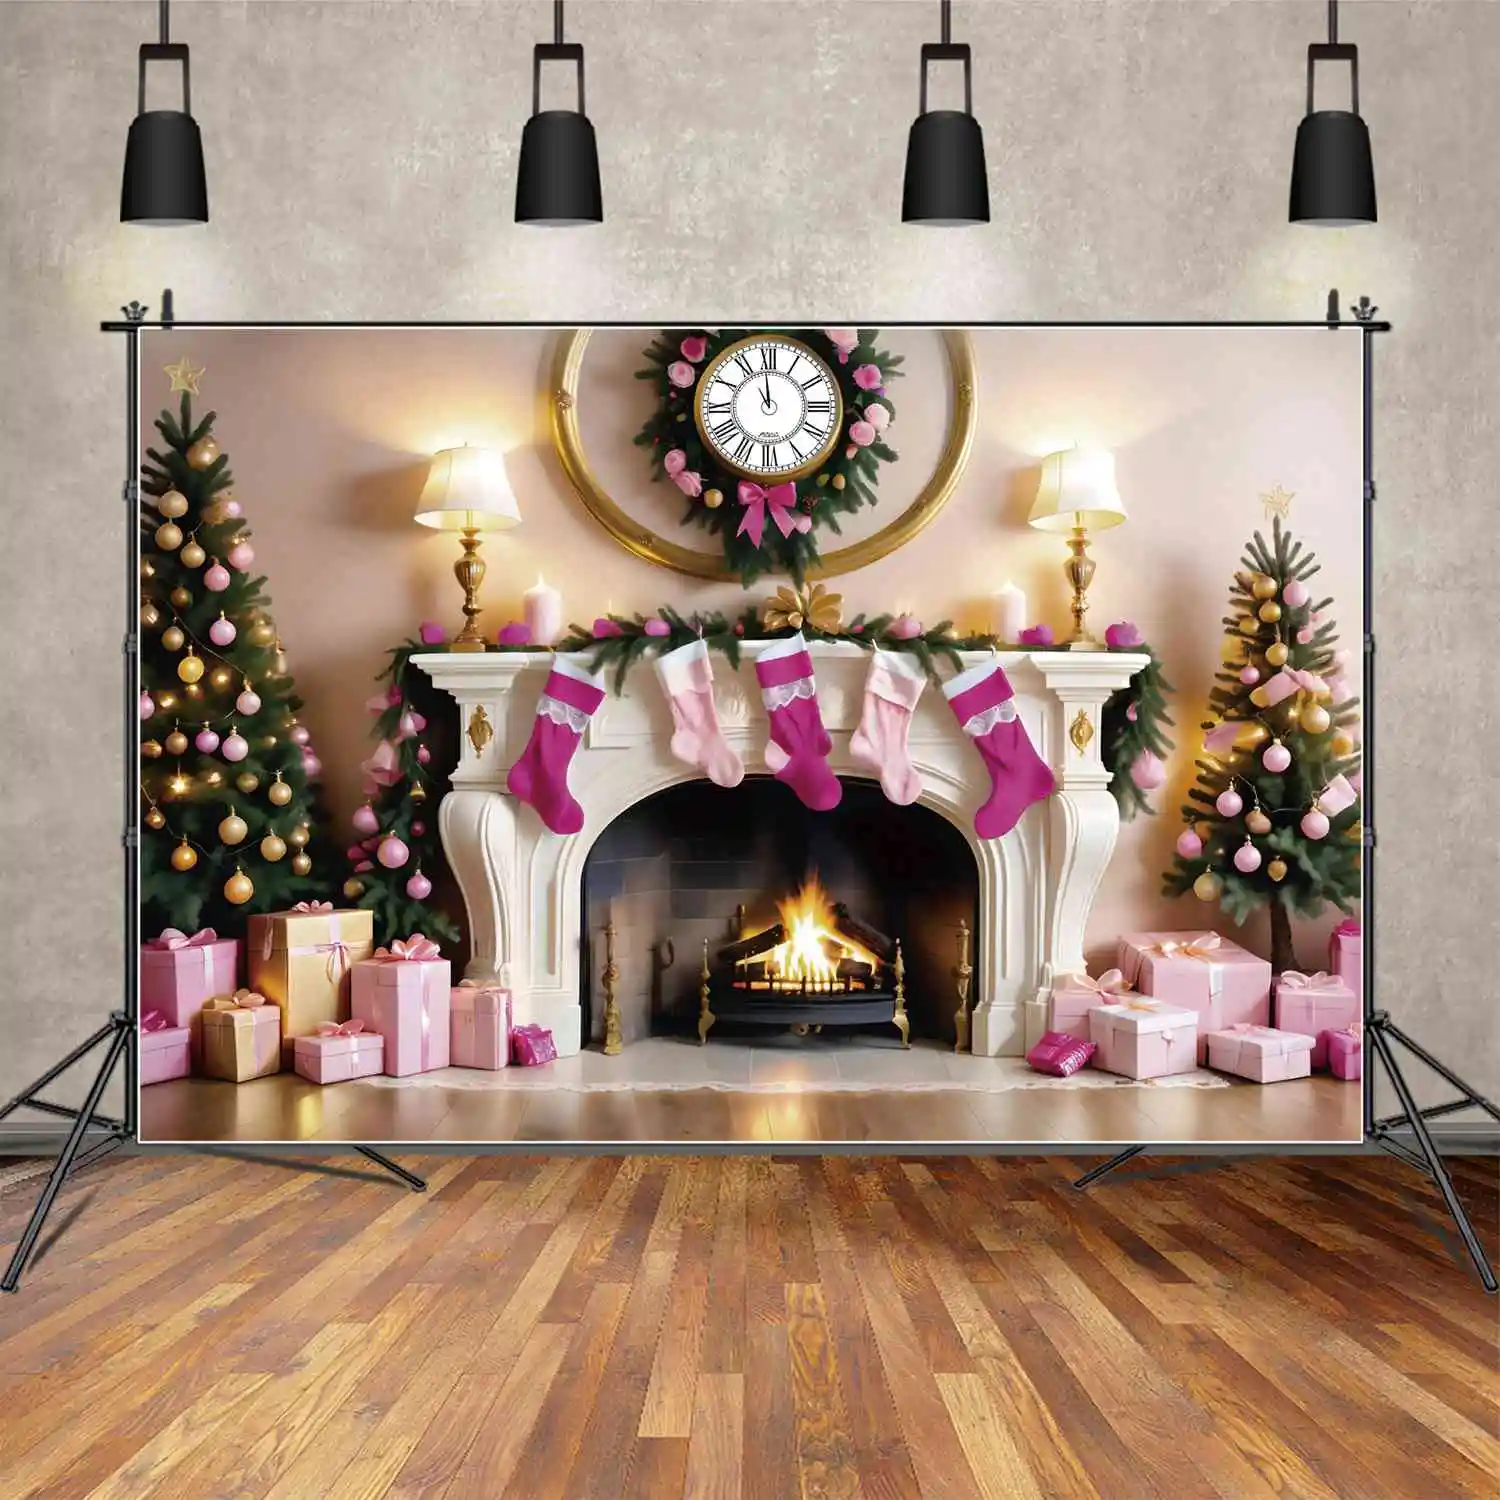 

MOON.QG Backdrop Pink Christmas Fireplace Photozone Backgrounds Novelty Ornaments Decorations for Home Photography Accessories